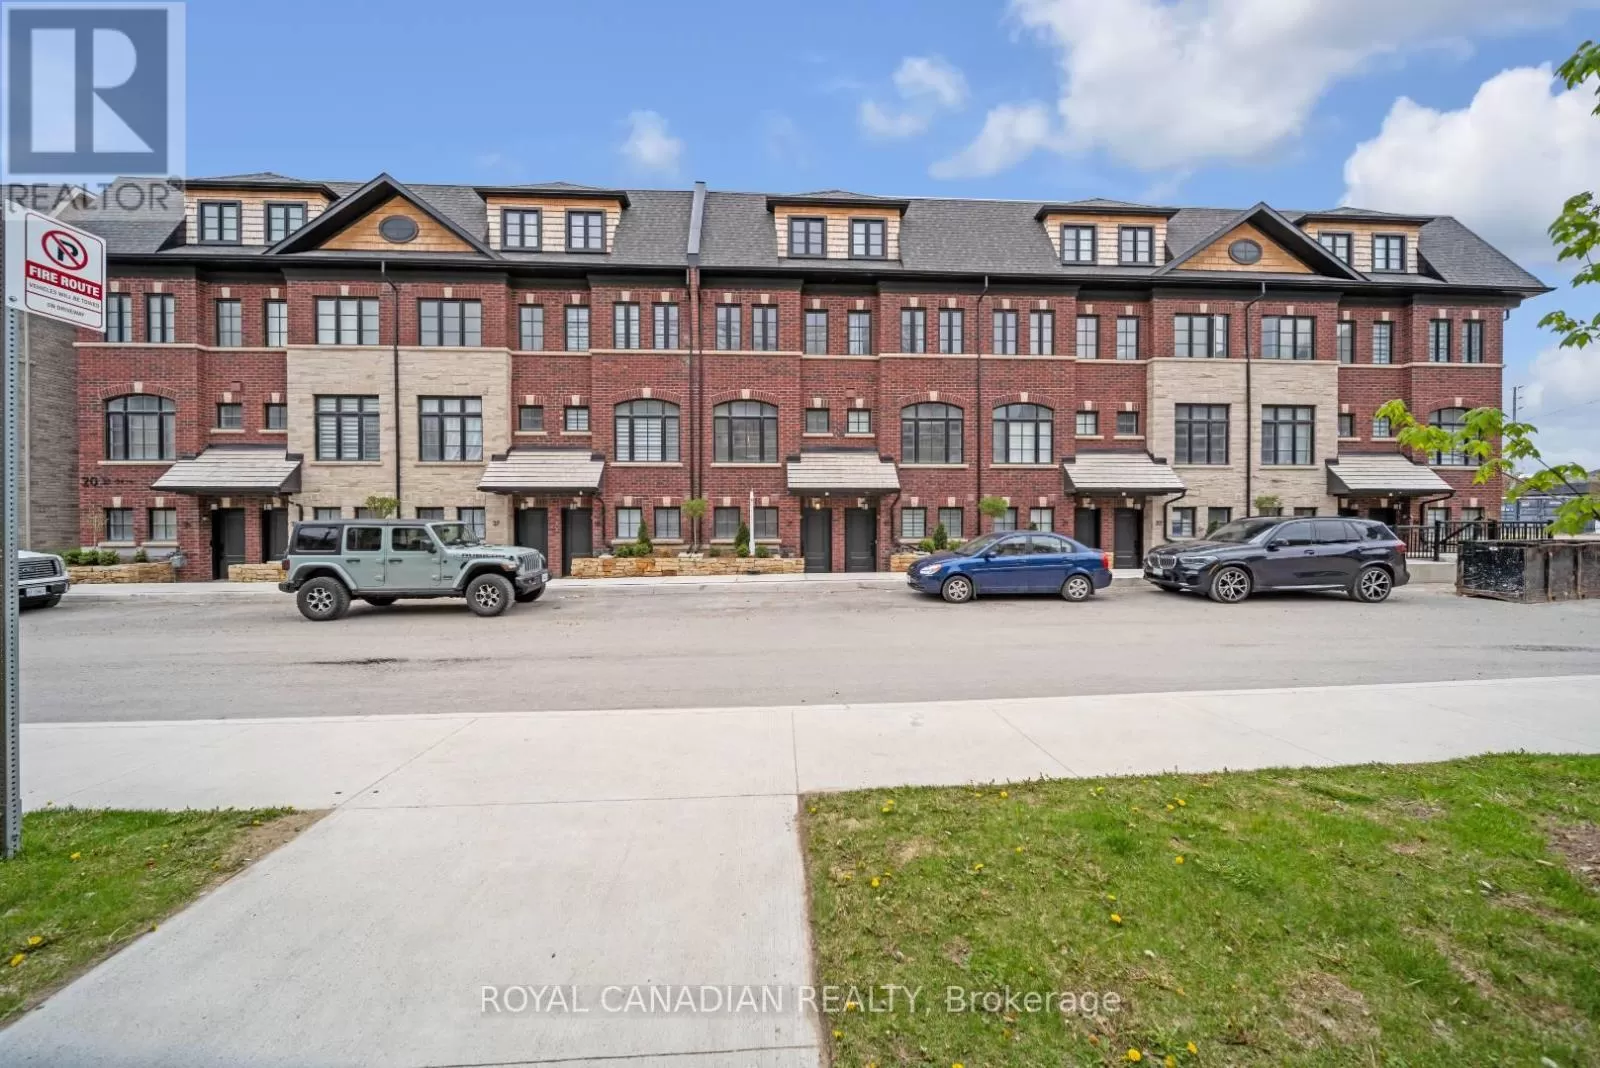 Row / Townhouse for rent: 29 - 20 Lunar Crescent, Mississauga, Ontario L5M 2R5